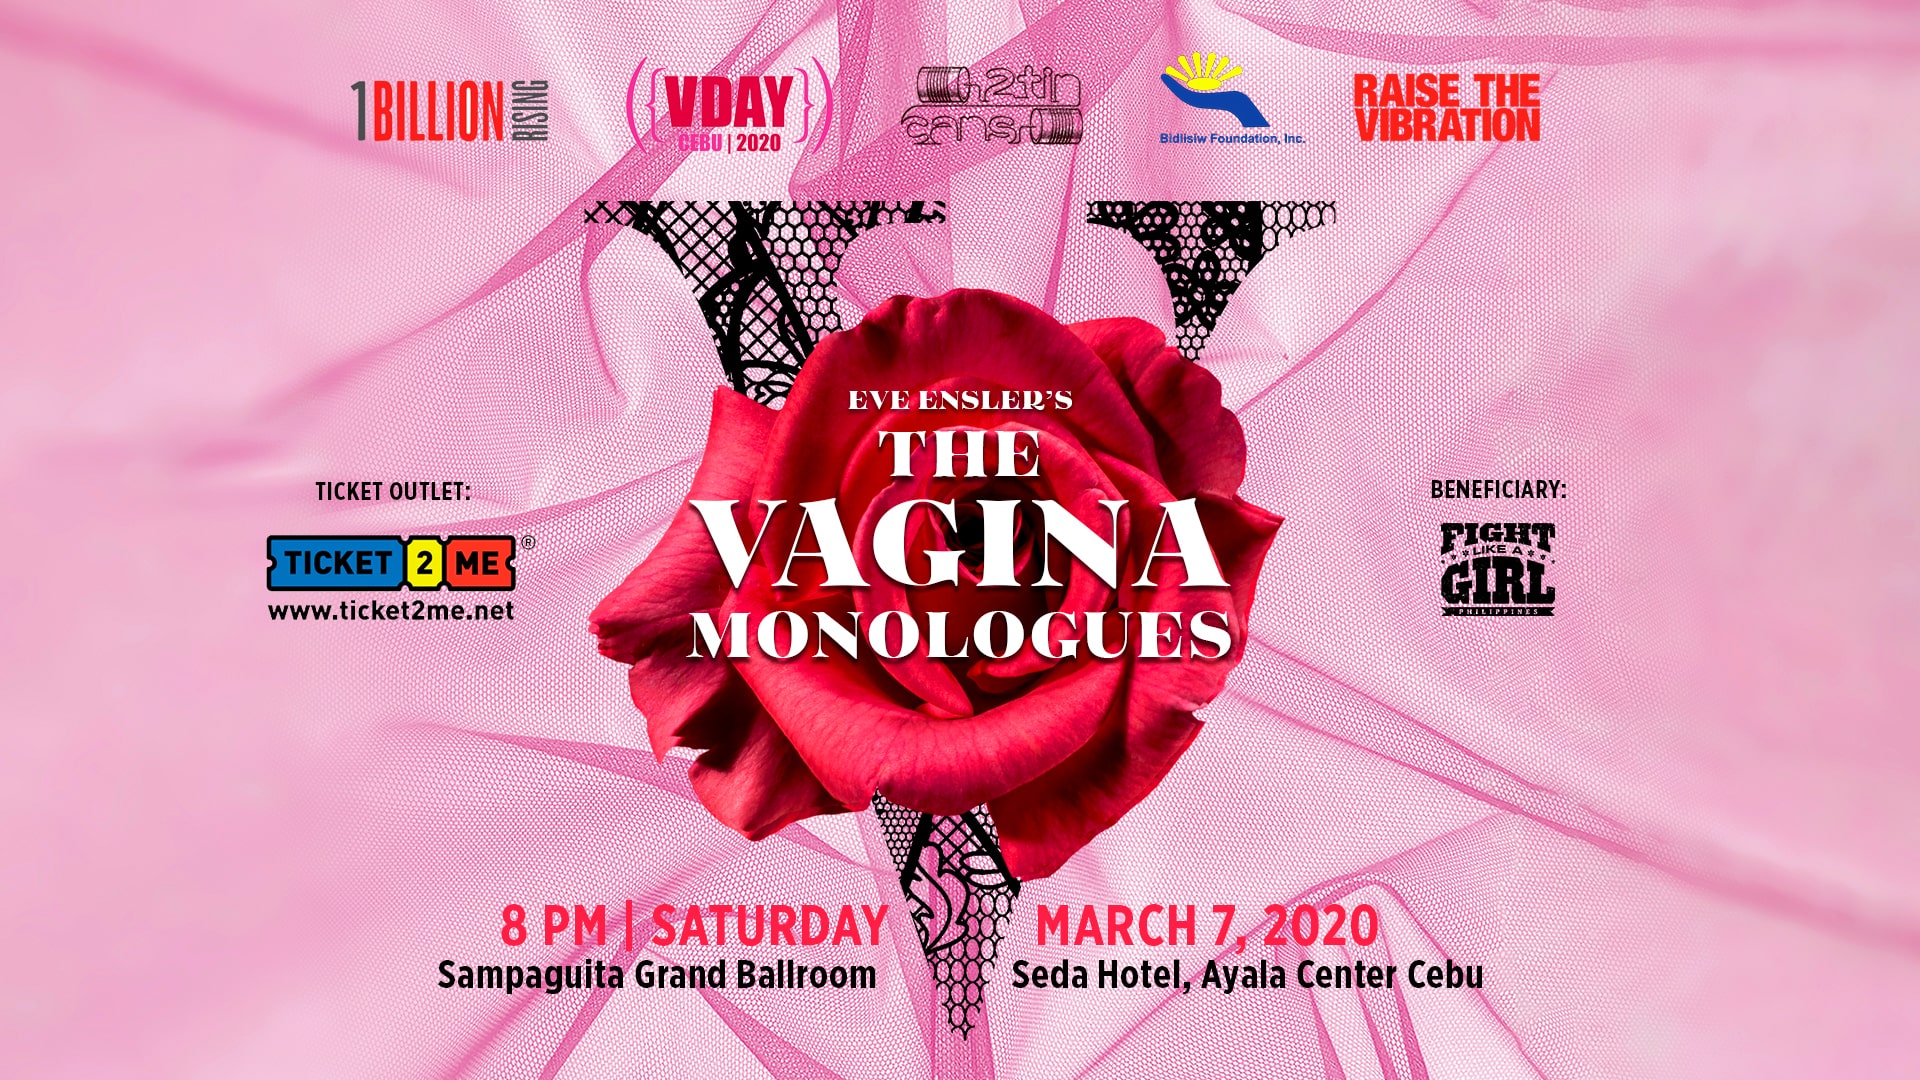 VDAY The Vagina Monologues Is Back In Cebu Clavel Magazine